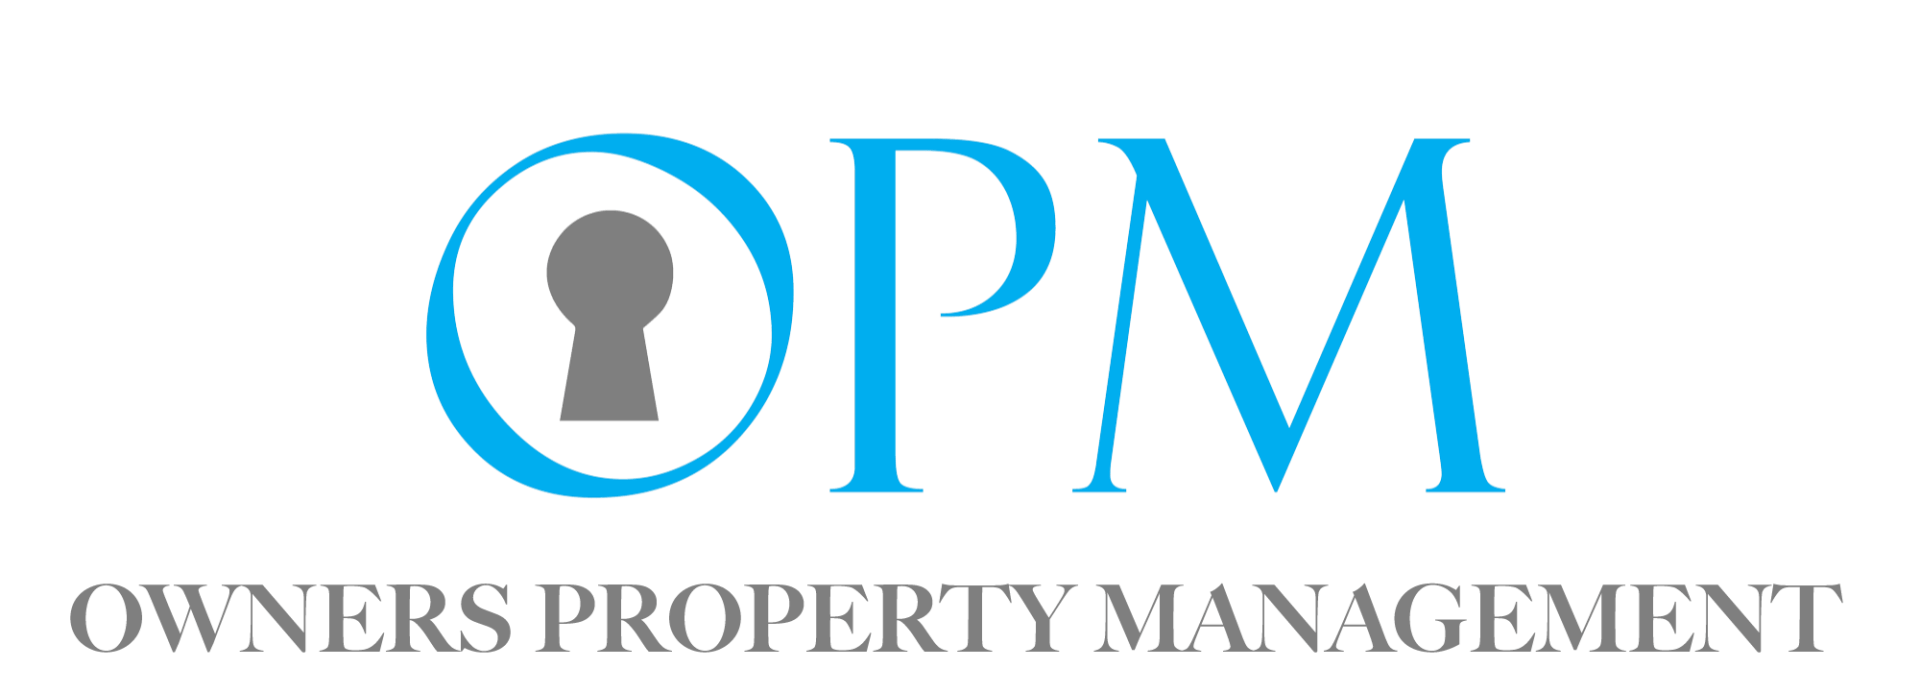 Owners Property Management Logo